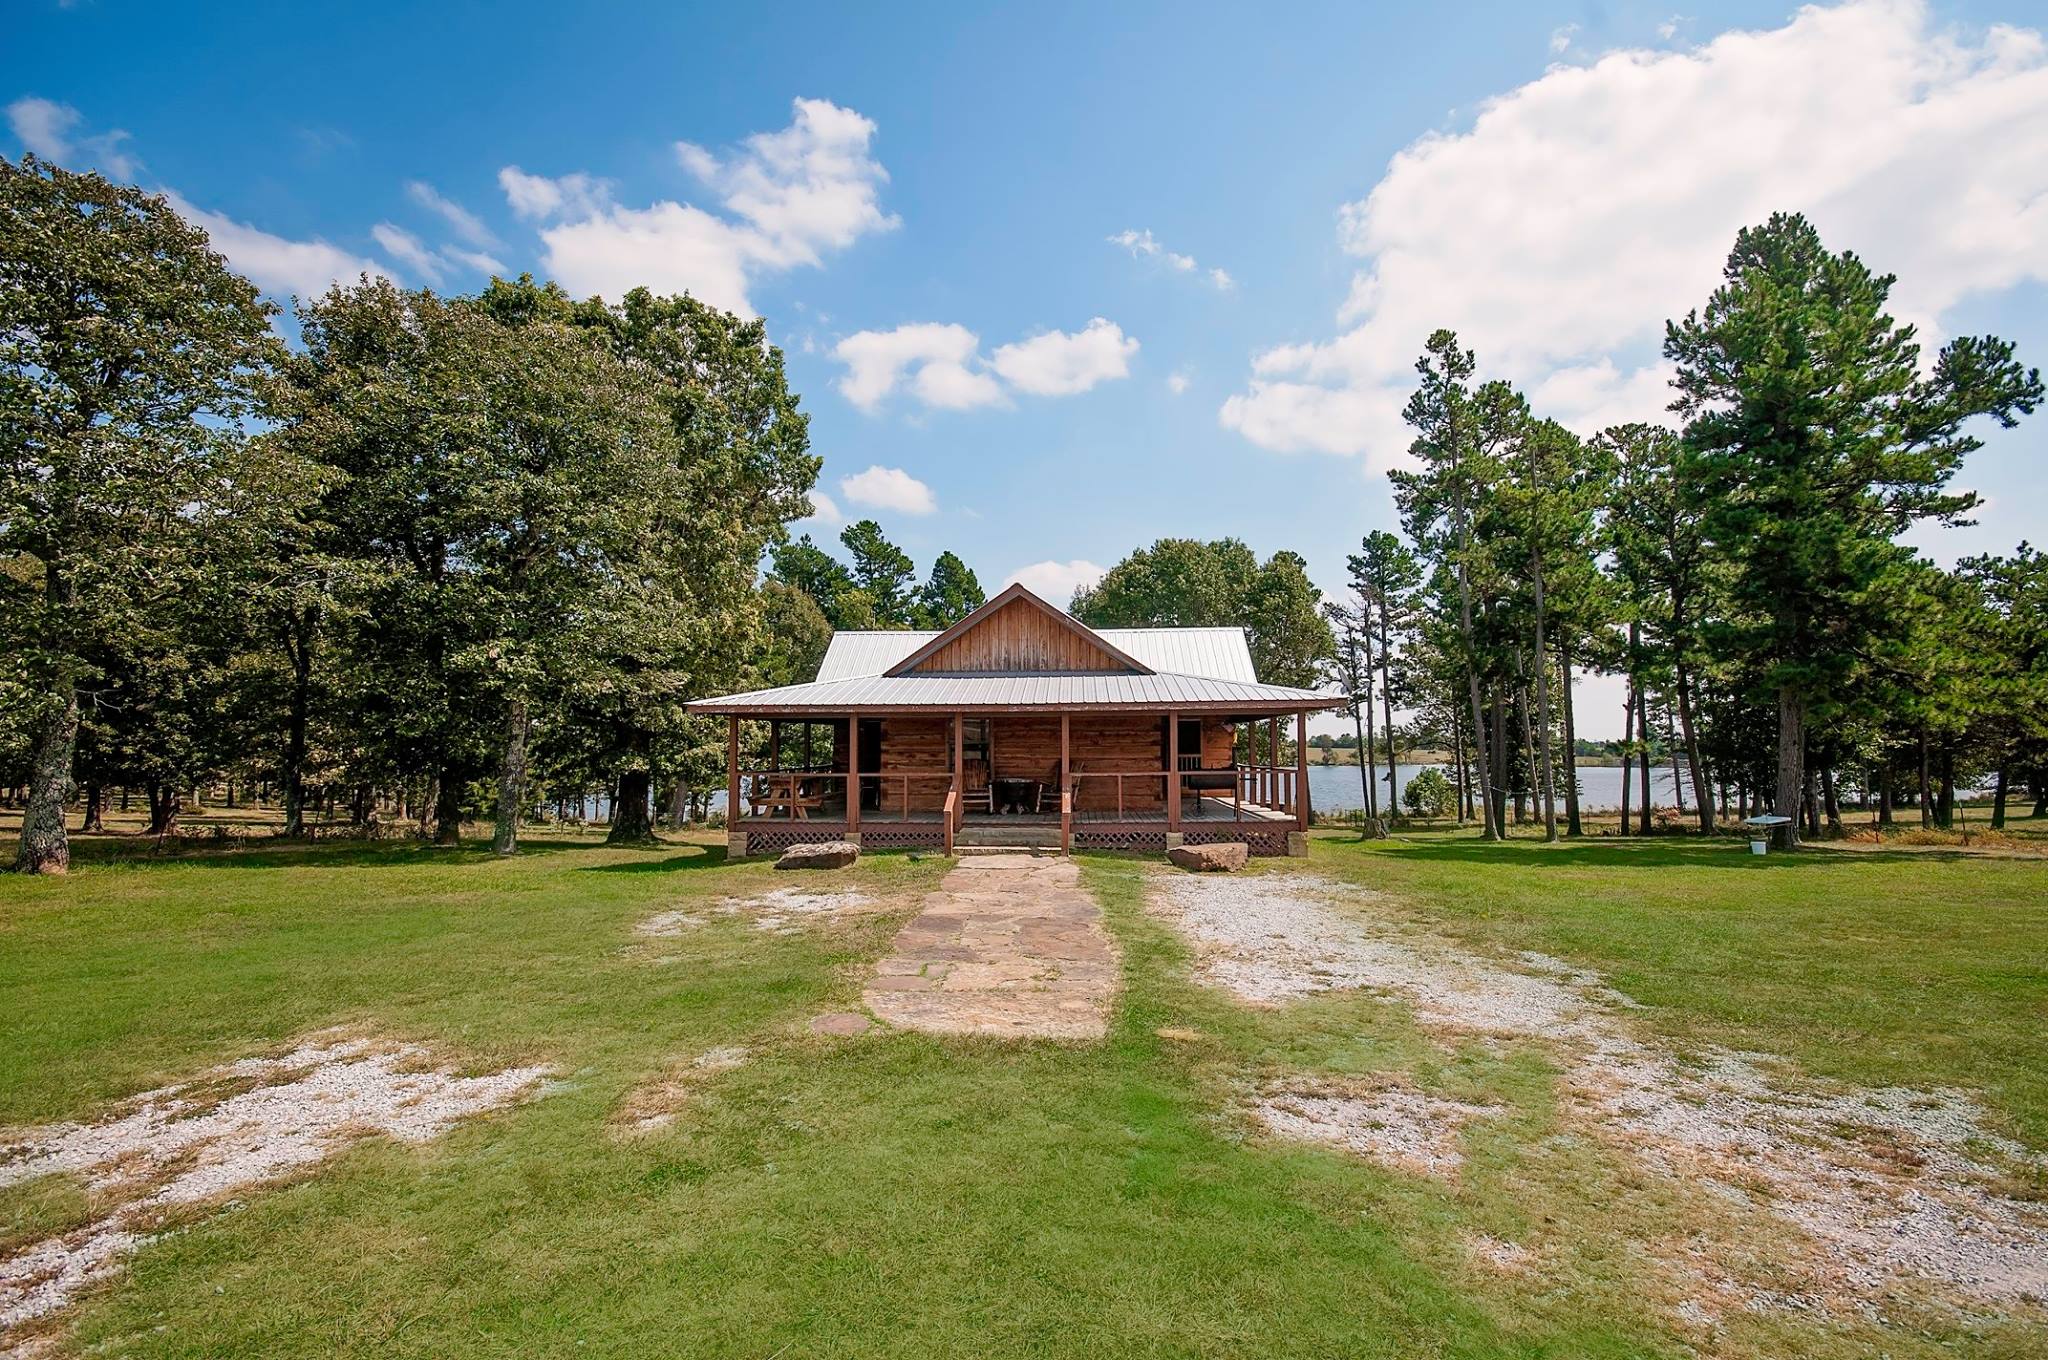 Luxury cabin for rent near Buffalo National River  Park comes with PRIVATE 22 acre lake.